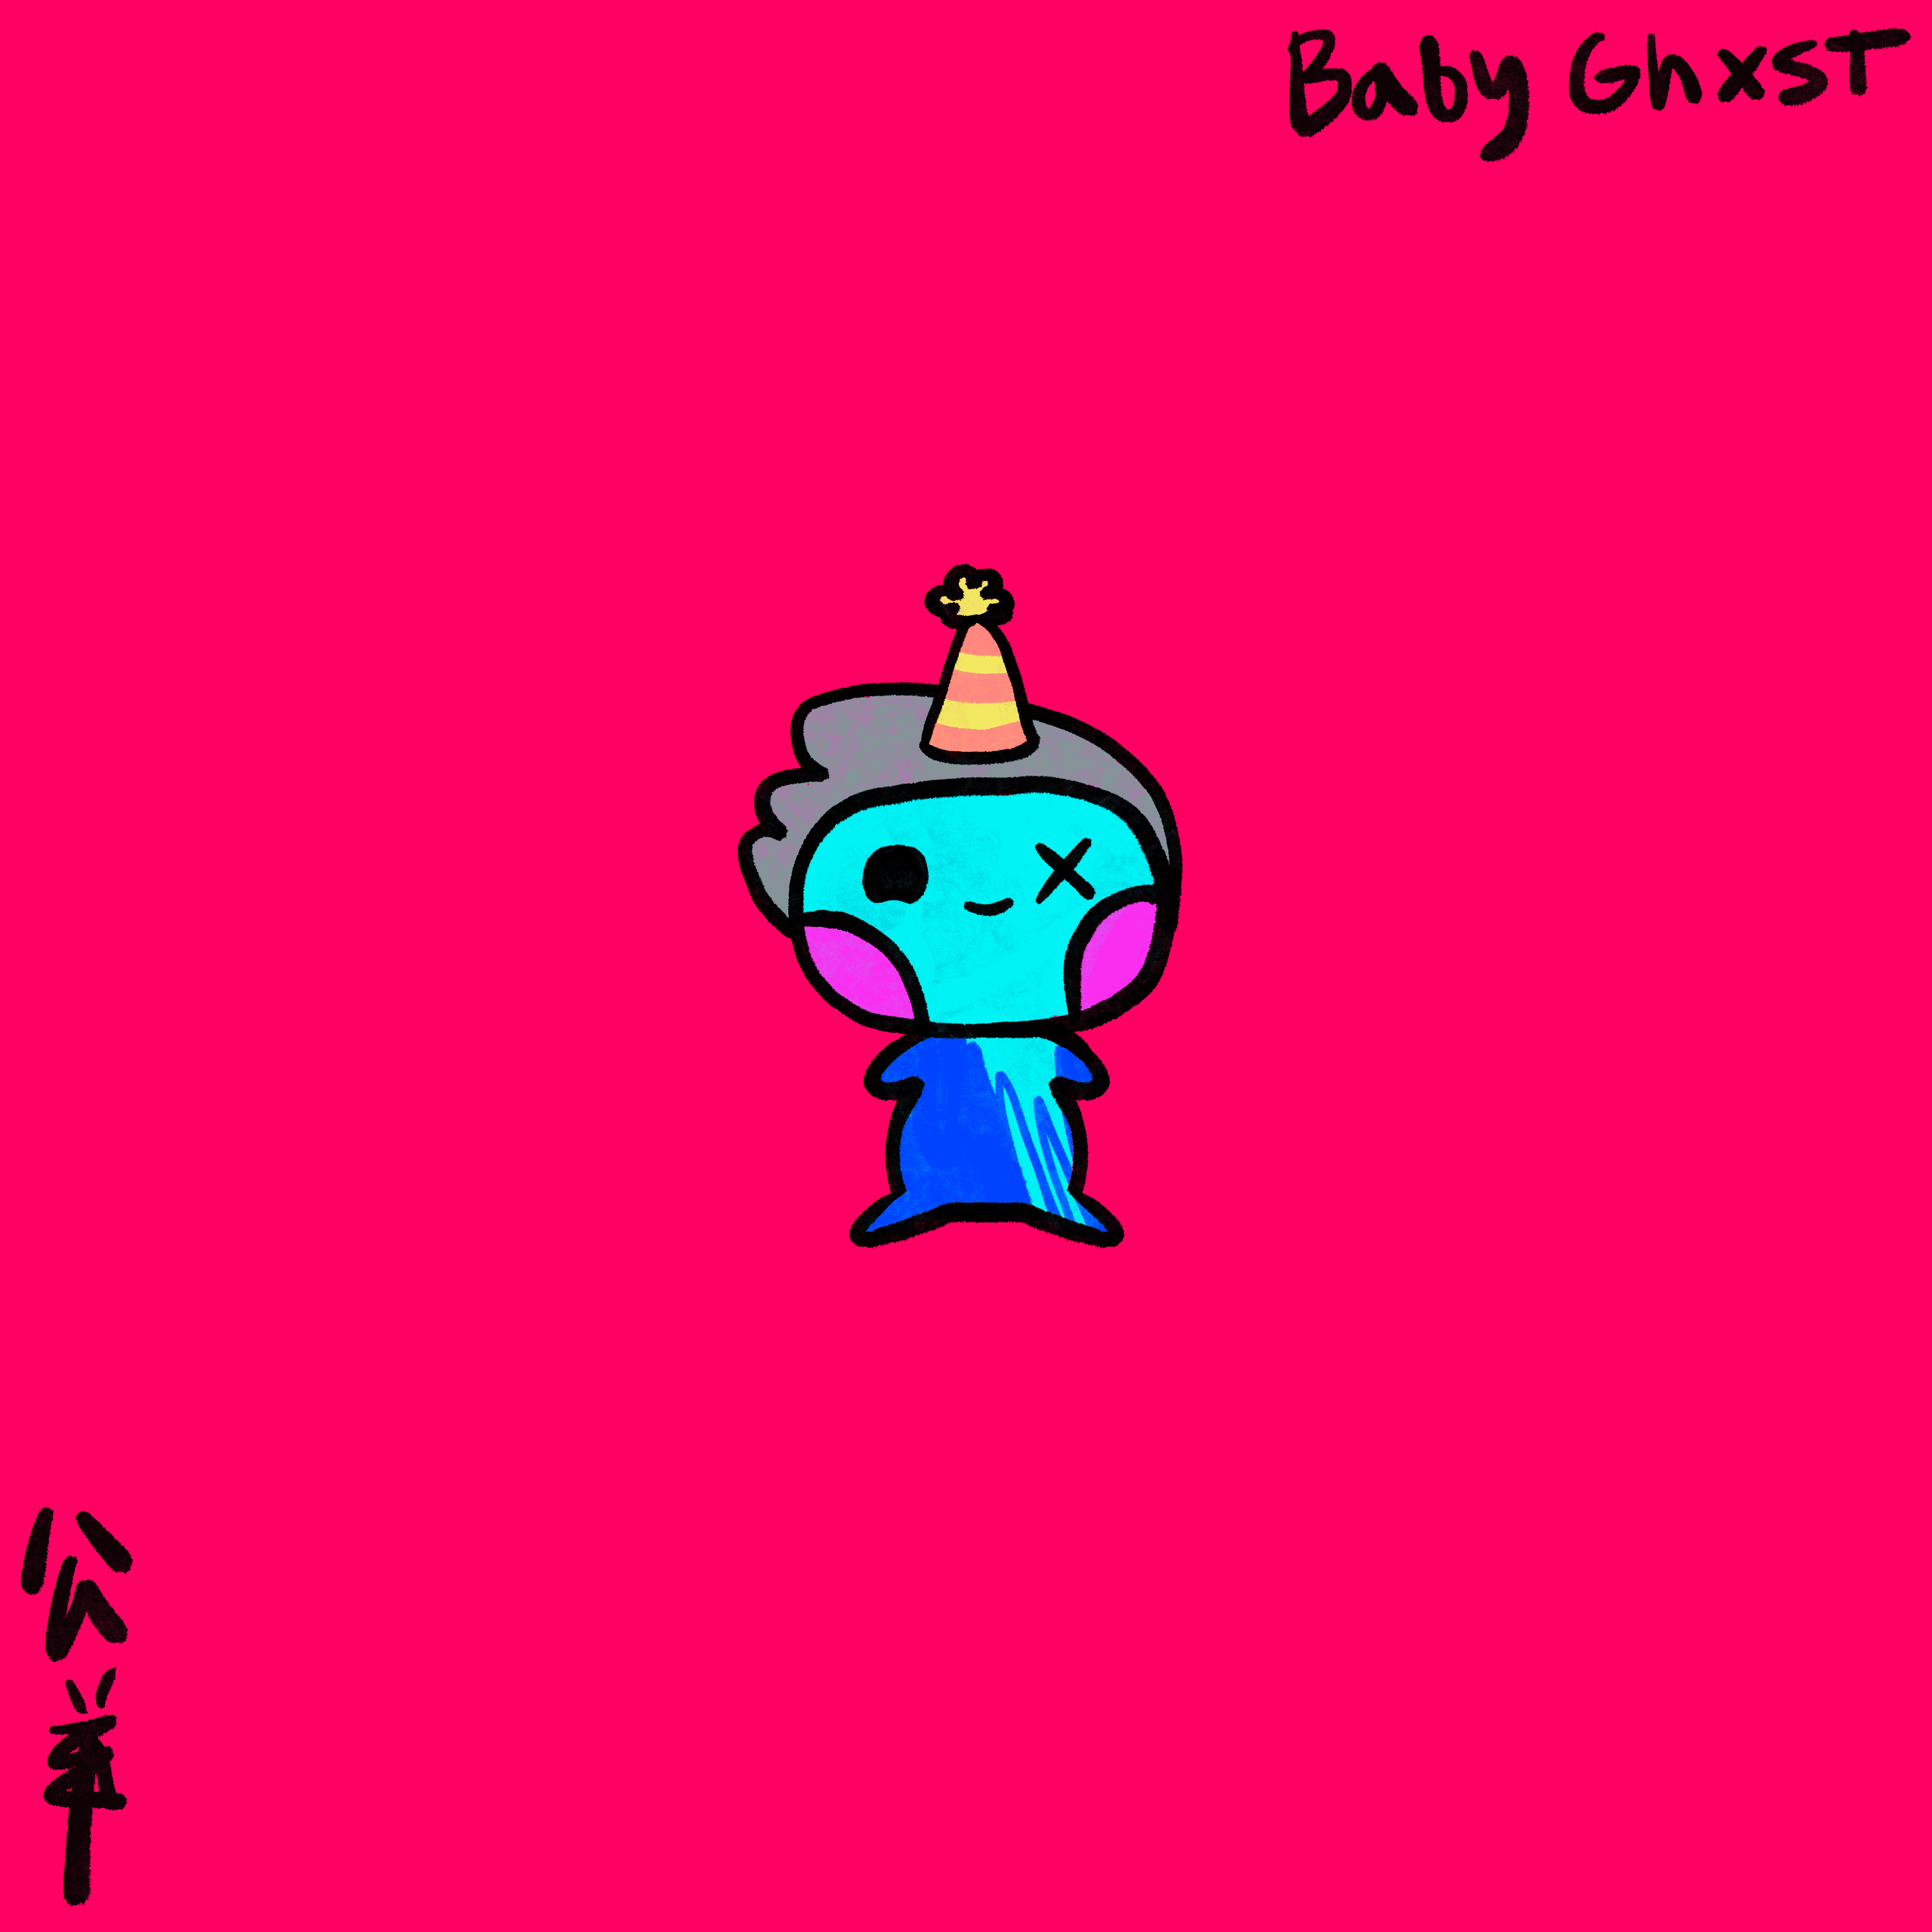 Baby Ghxst